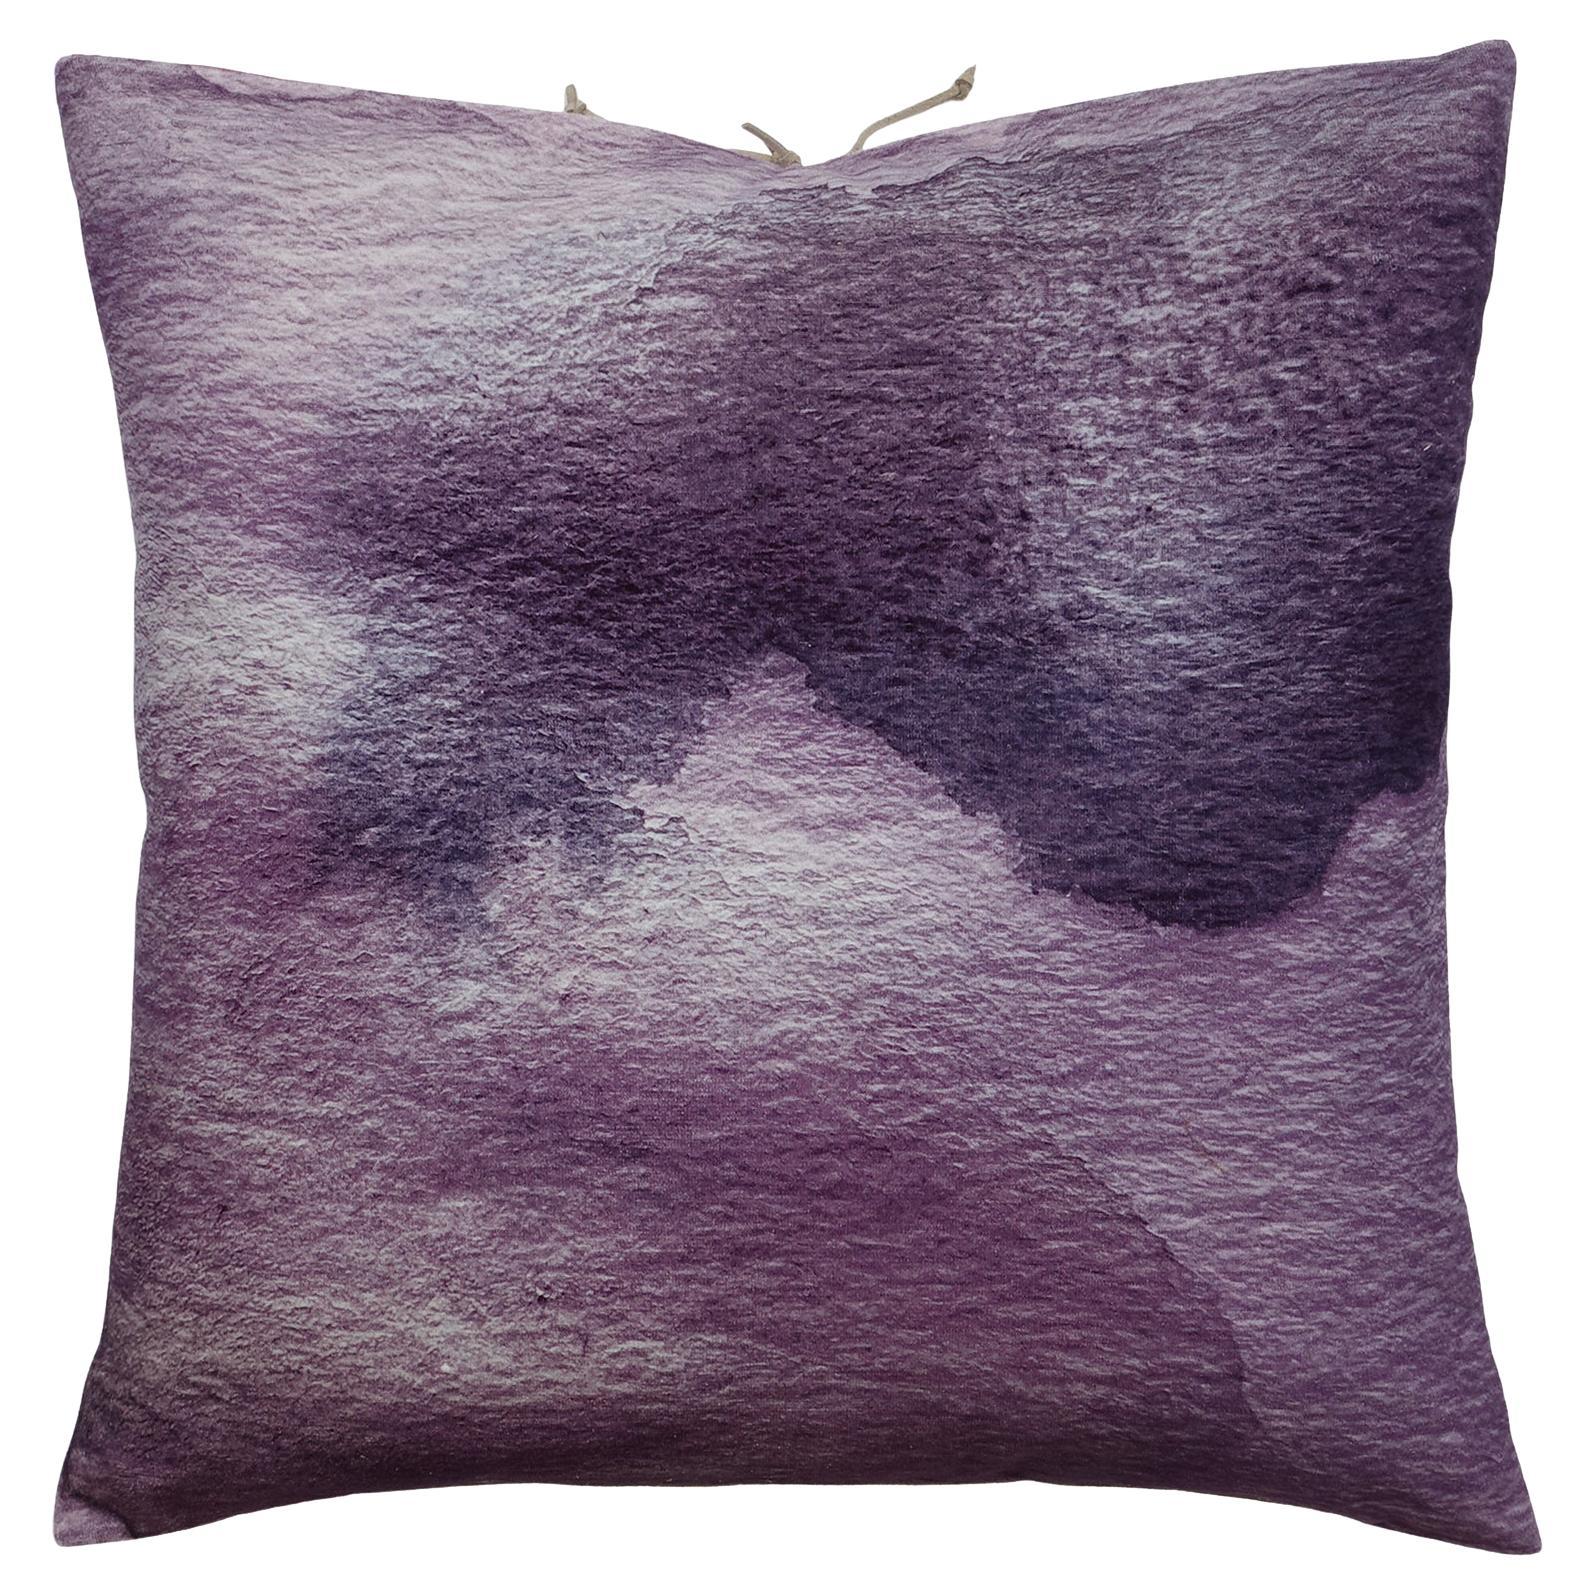 Printed Velvet Pillow Smudge Lilac For Sale